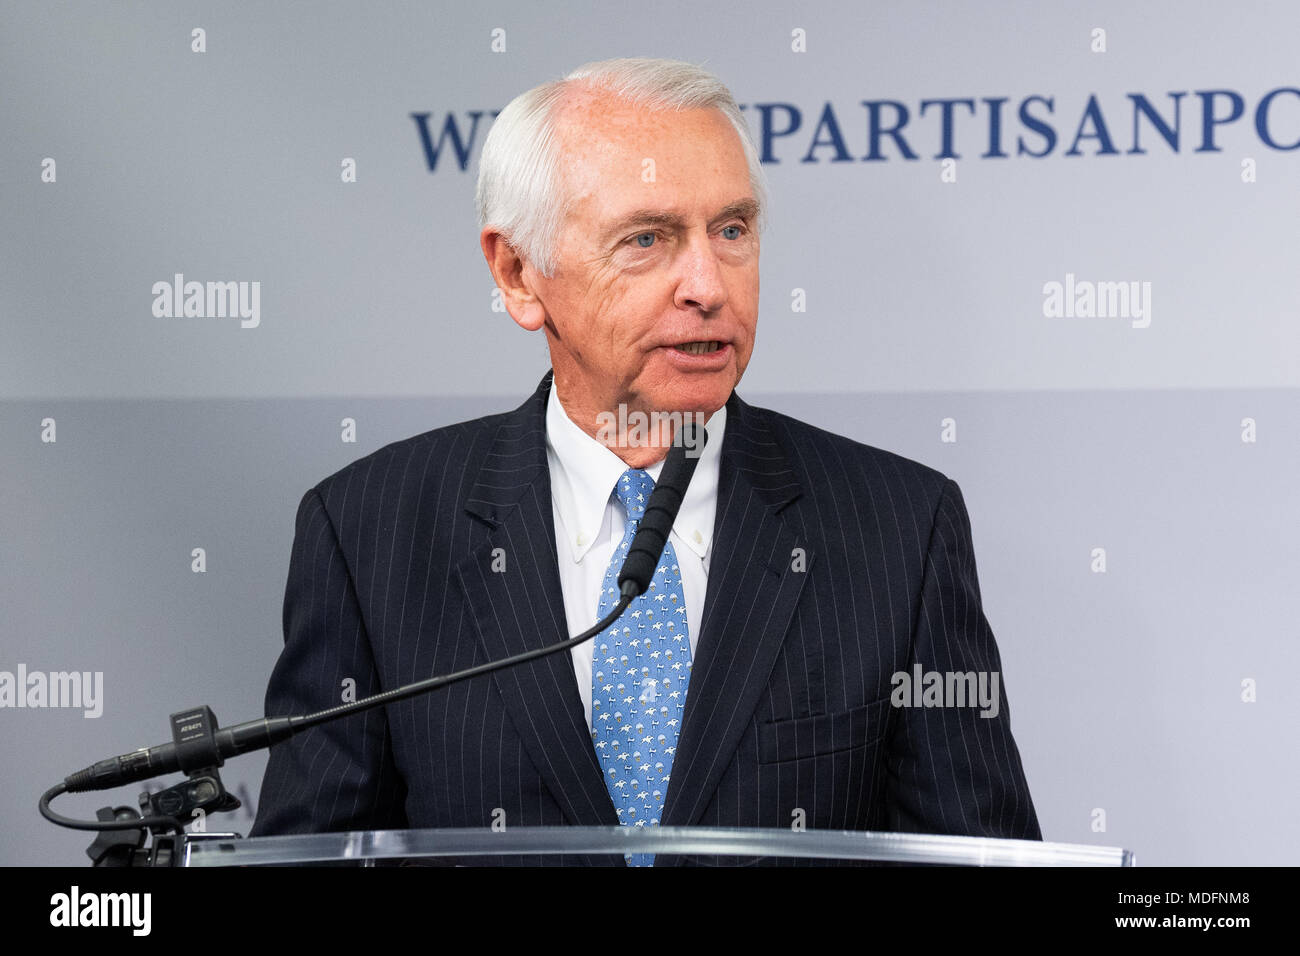 Former Kentucky Governor Steve Beshear speaking at the Restoring Our Democracy program at the Bipartisan Policy Center. Stock Photo